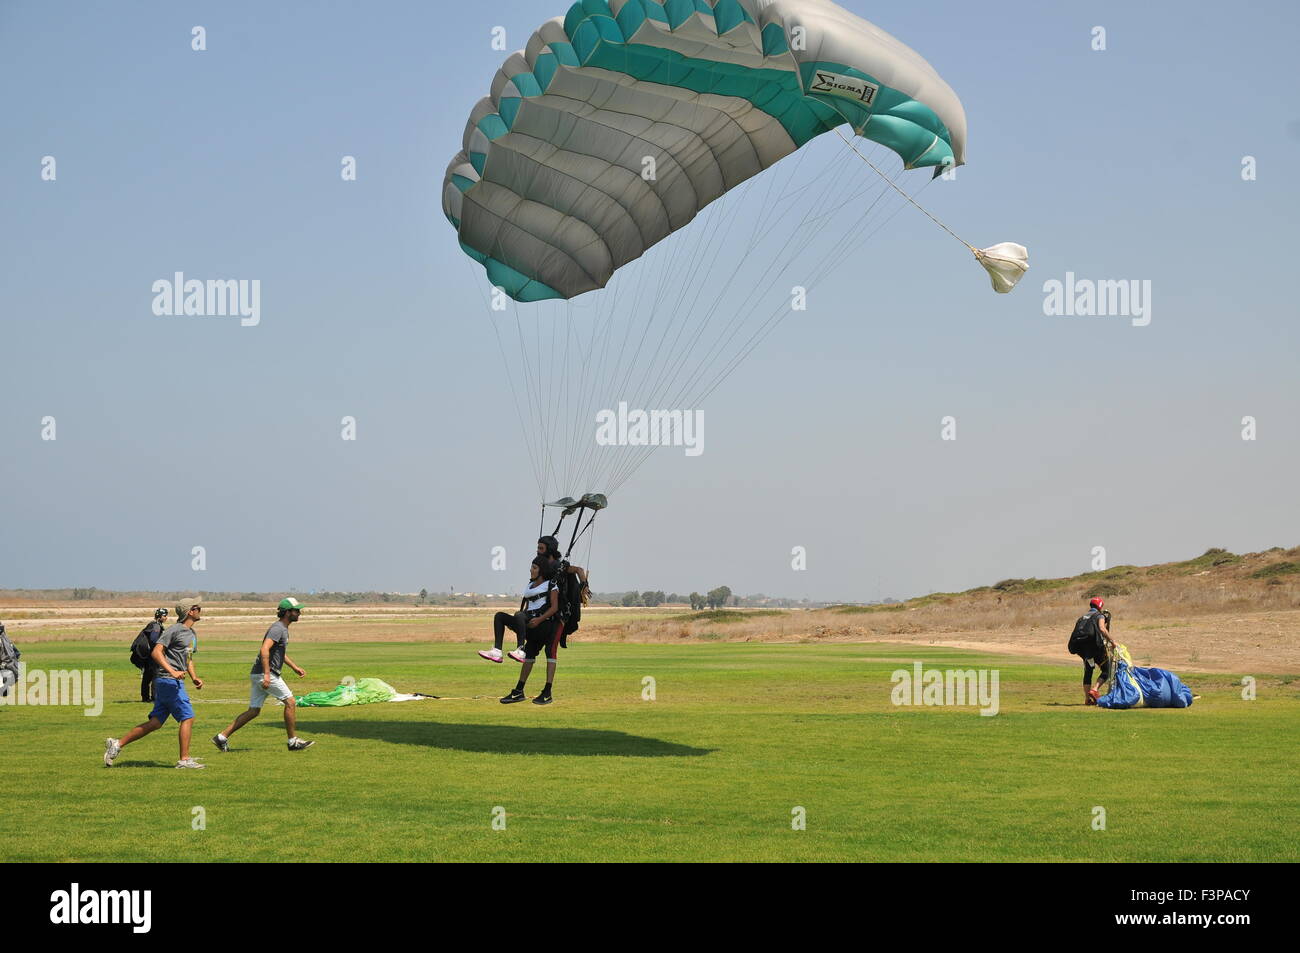 Tandem paragliding Instructor and trainee tied together at landing Stock Photo